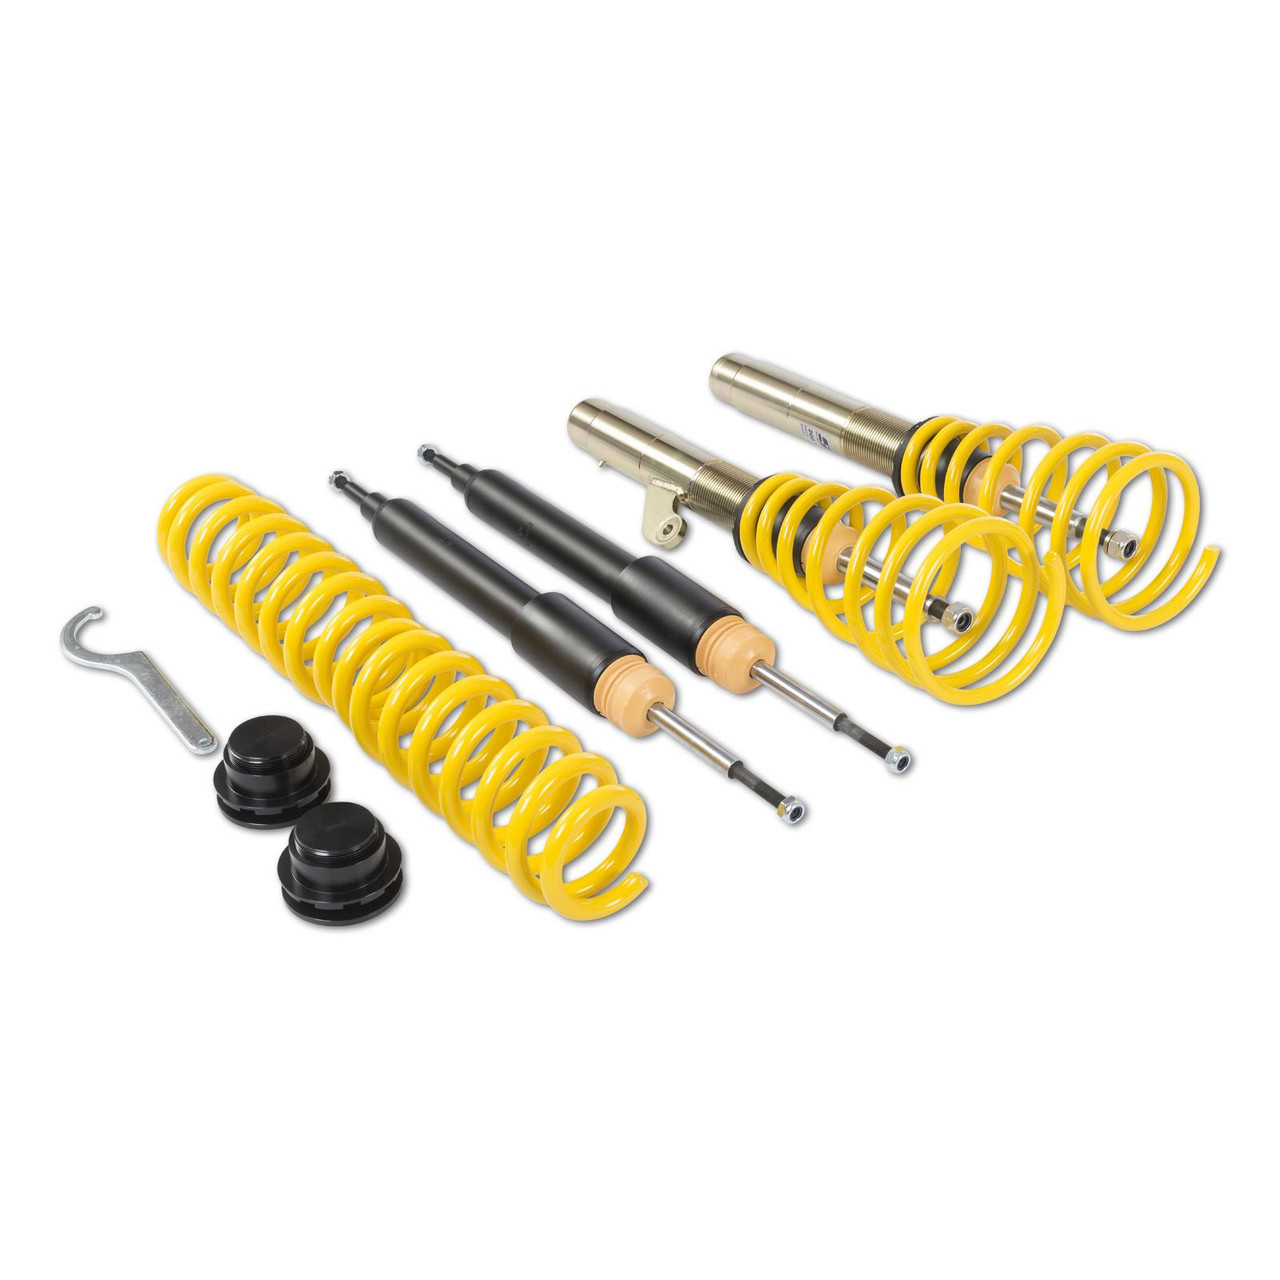 BMW ST X Coilover Kit - ST Suspensions 13220023